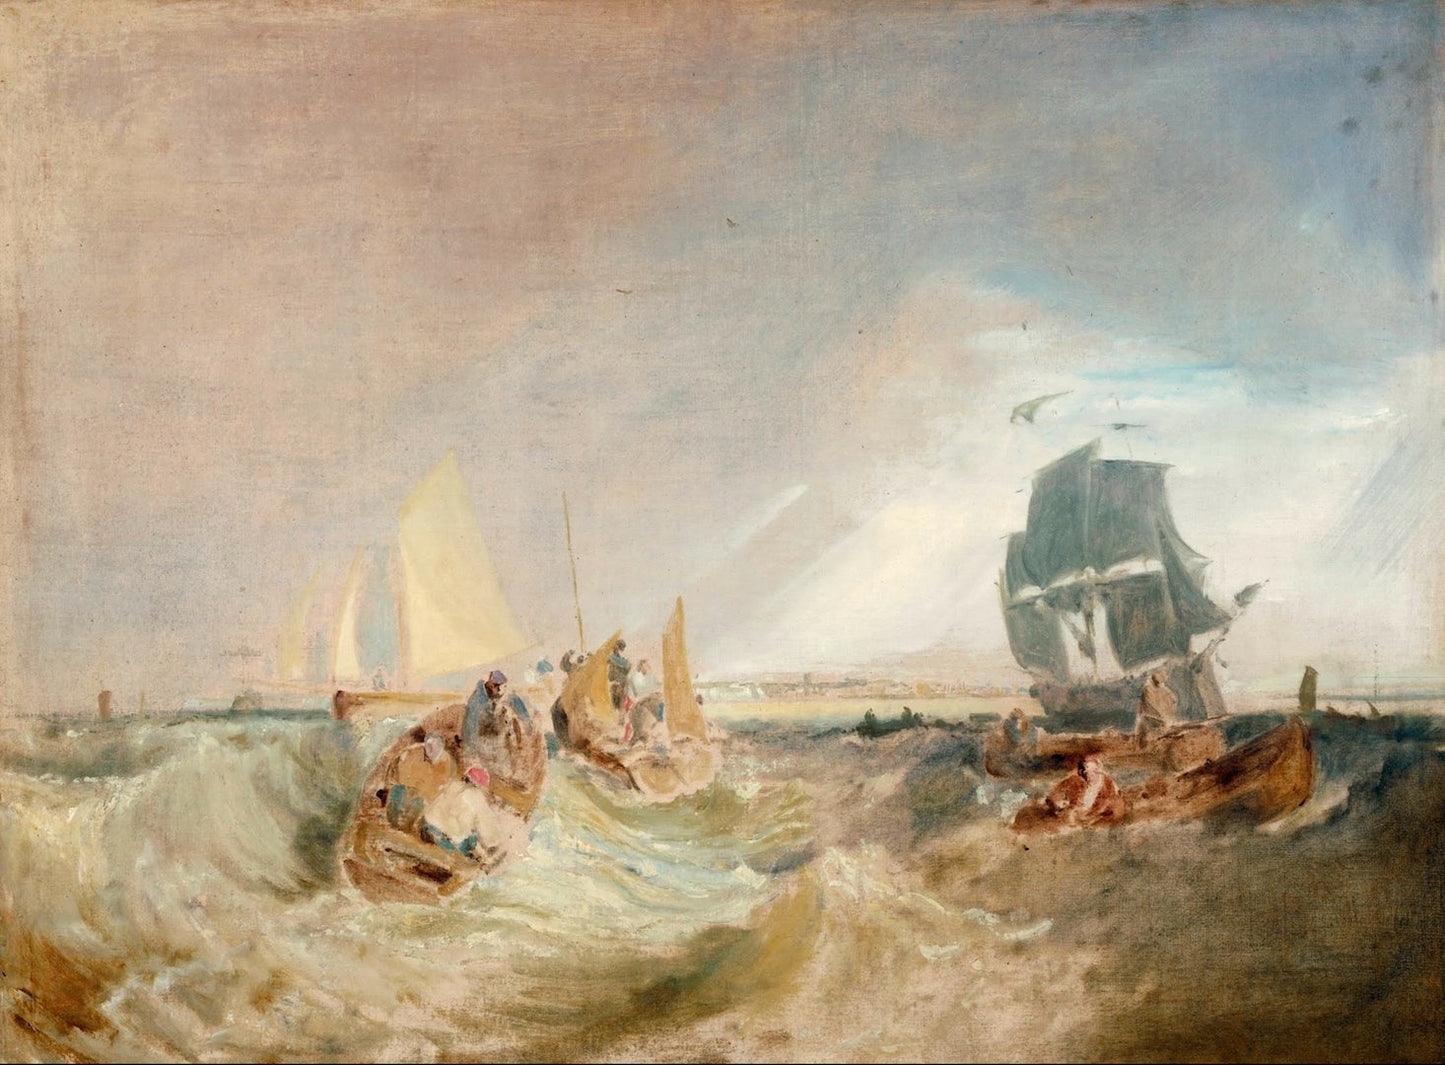 Joseph Mallord William Turner - Shipping at the Mouth of the Thames, Tate Britain